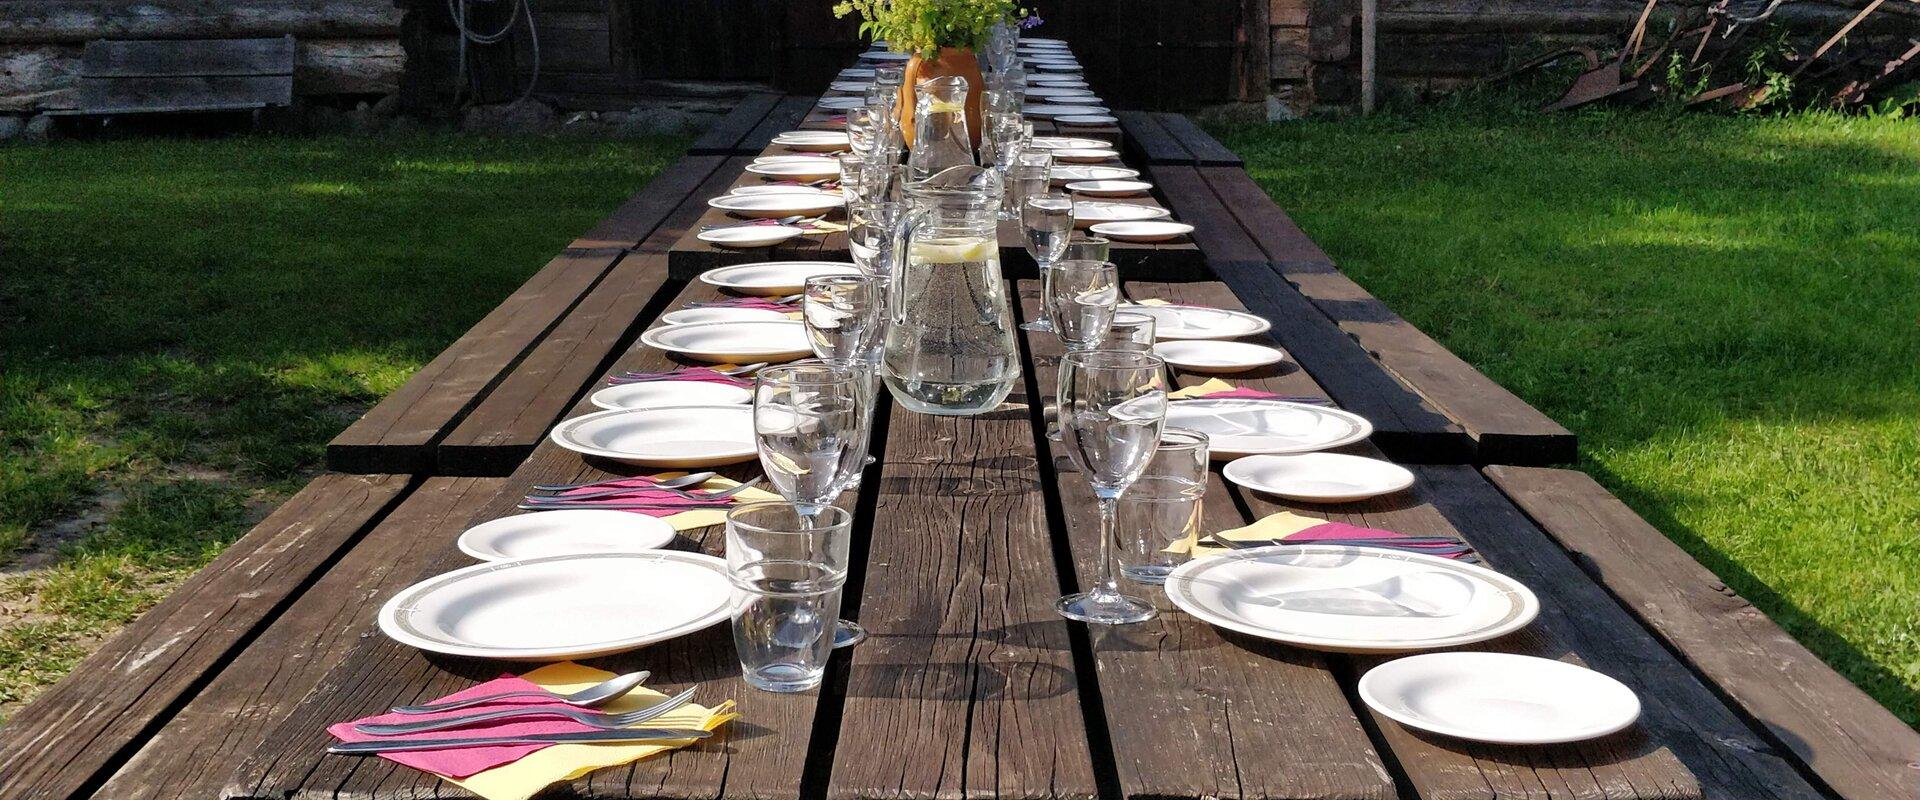 Laid table in the Liise Farm yard